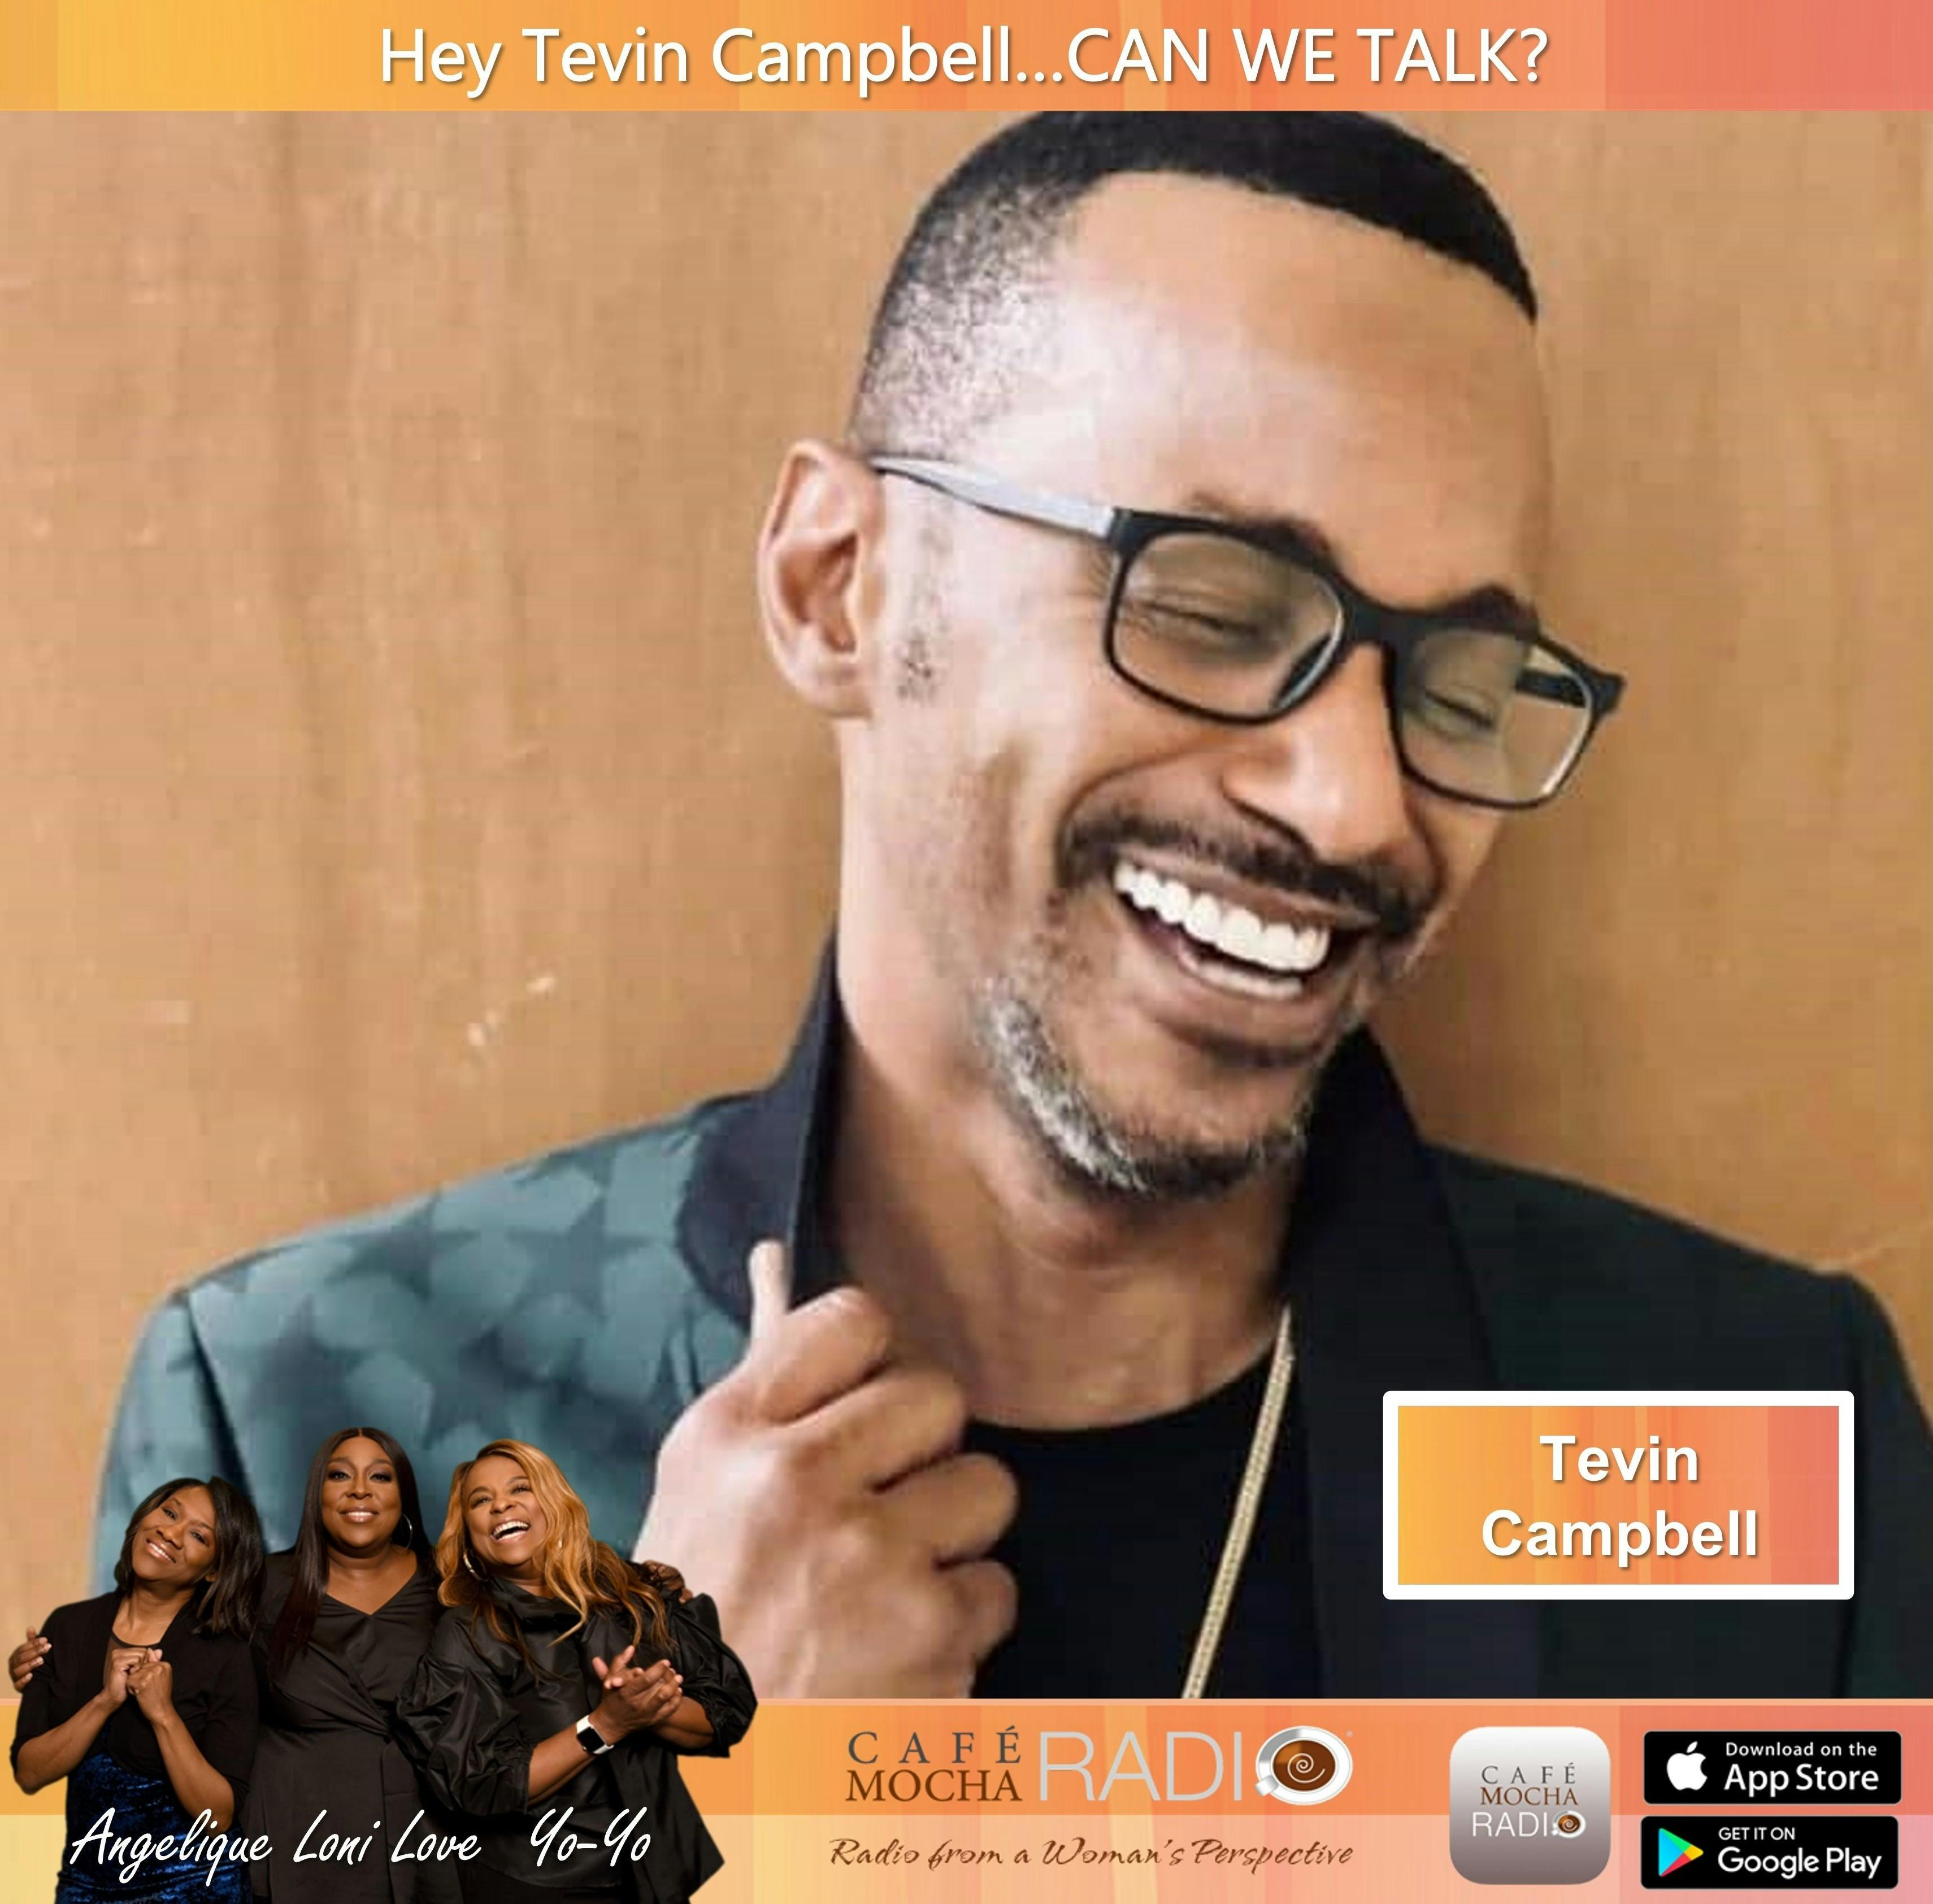 Hey Tevin Campbell...CAN WE TALK?